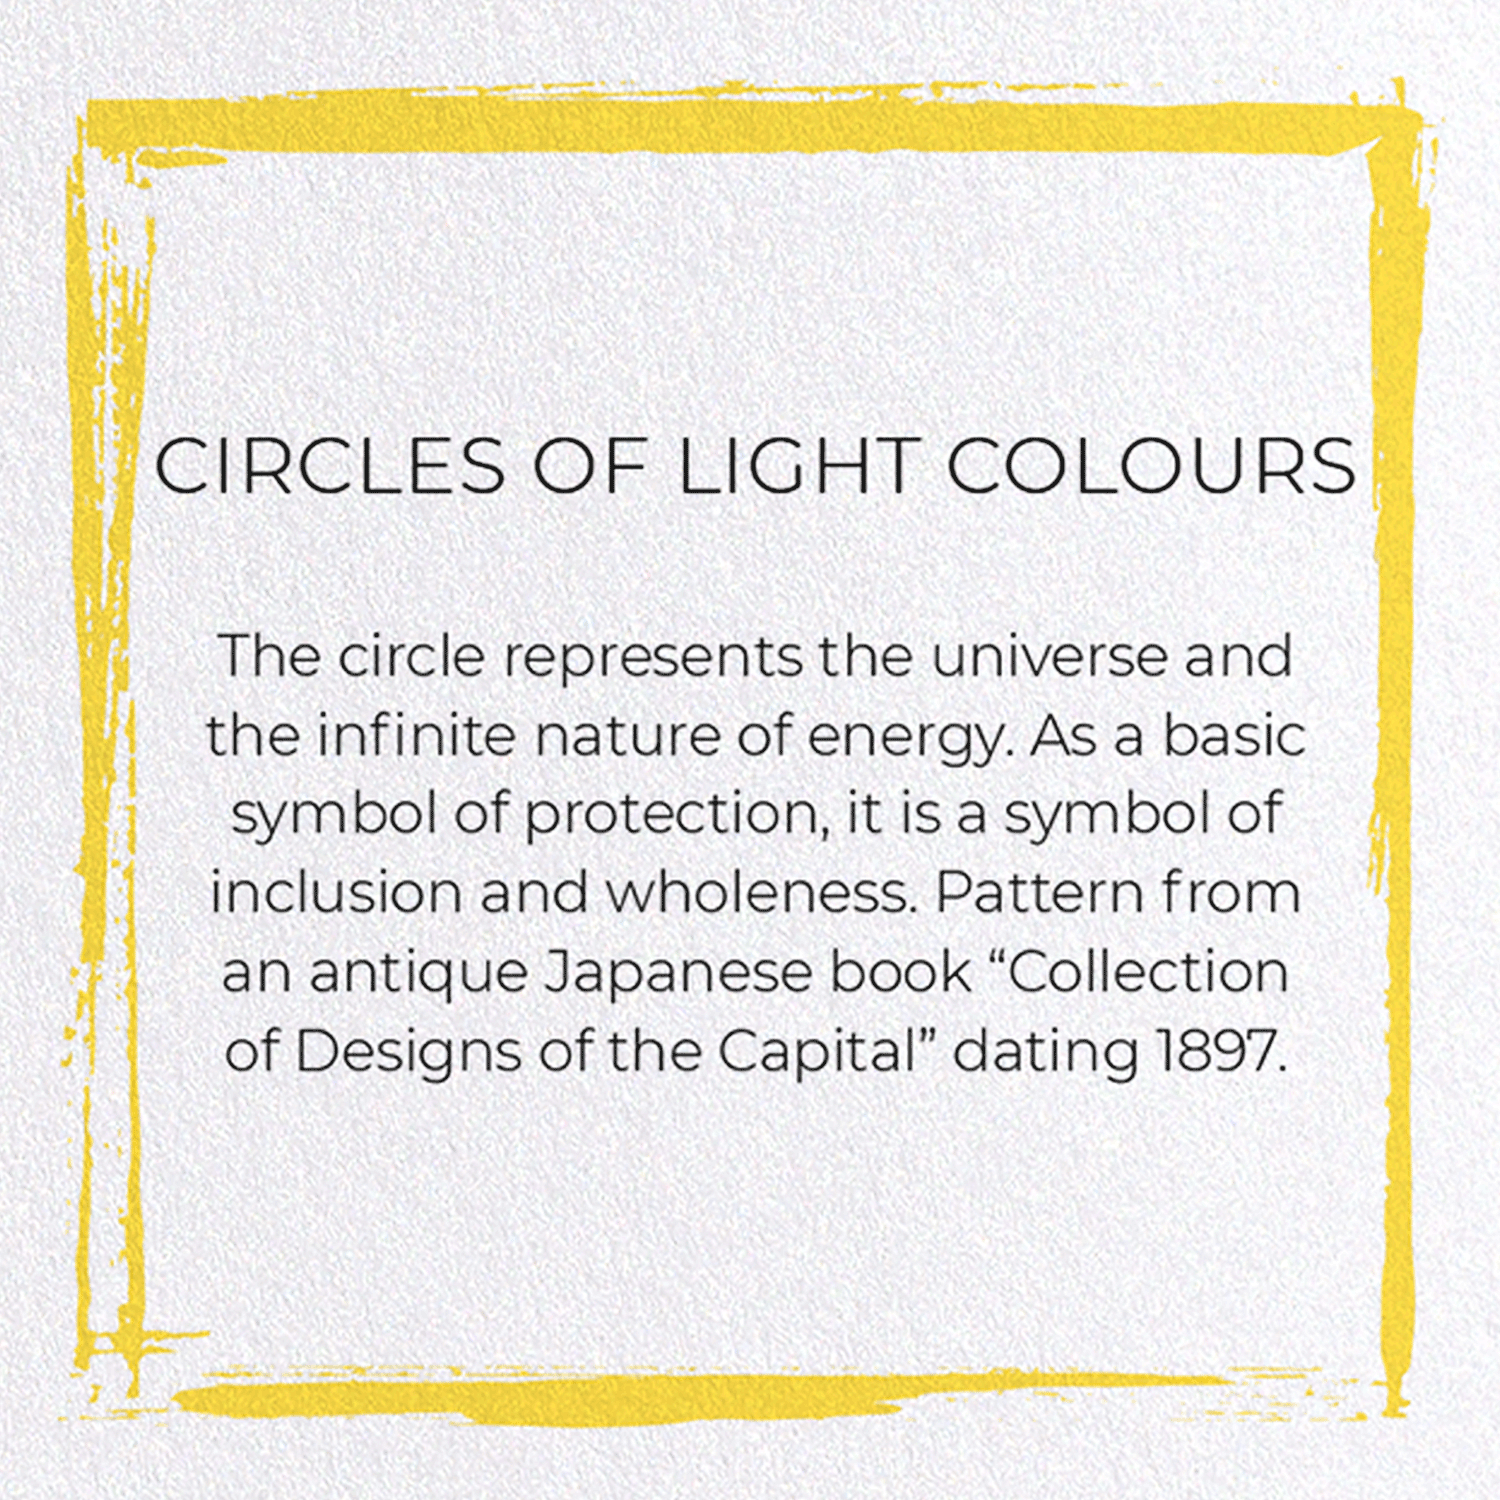 CIRCLES OF LIGHT COLOURS